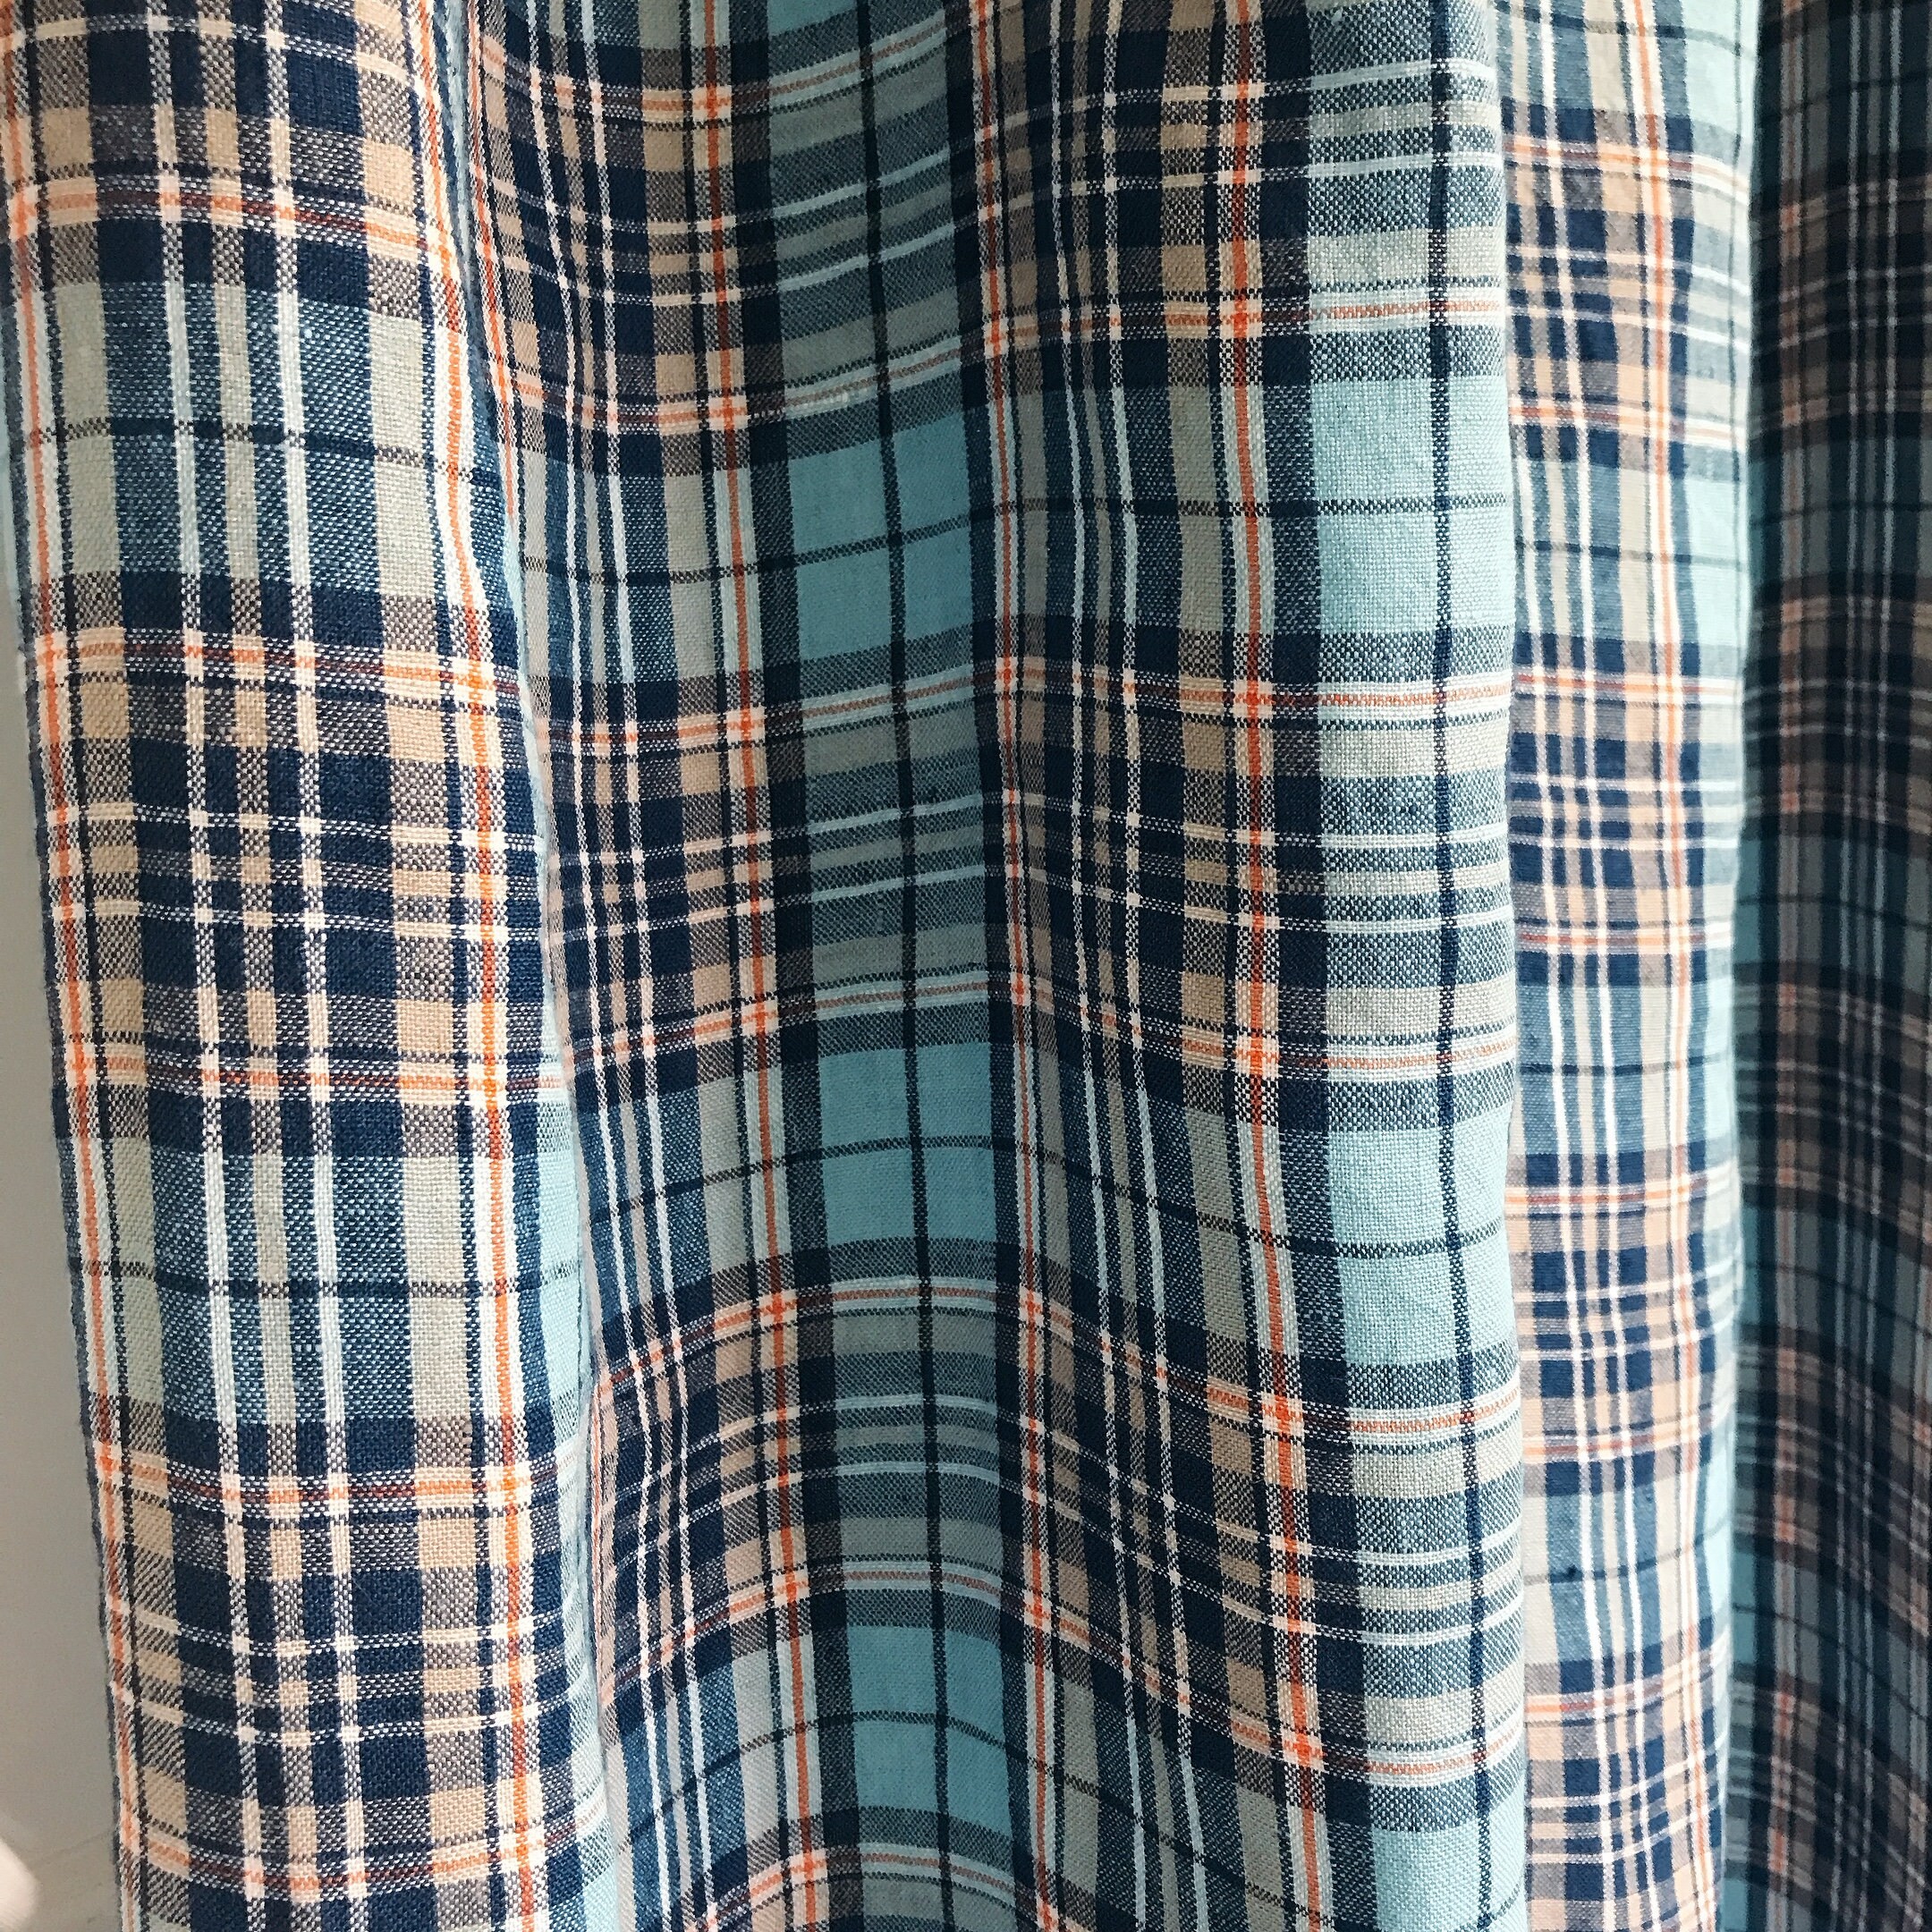 Vintage Blue Navy Check Plaid Patterned Curtain Linen Drapery | Etsy